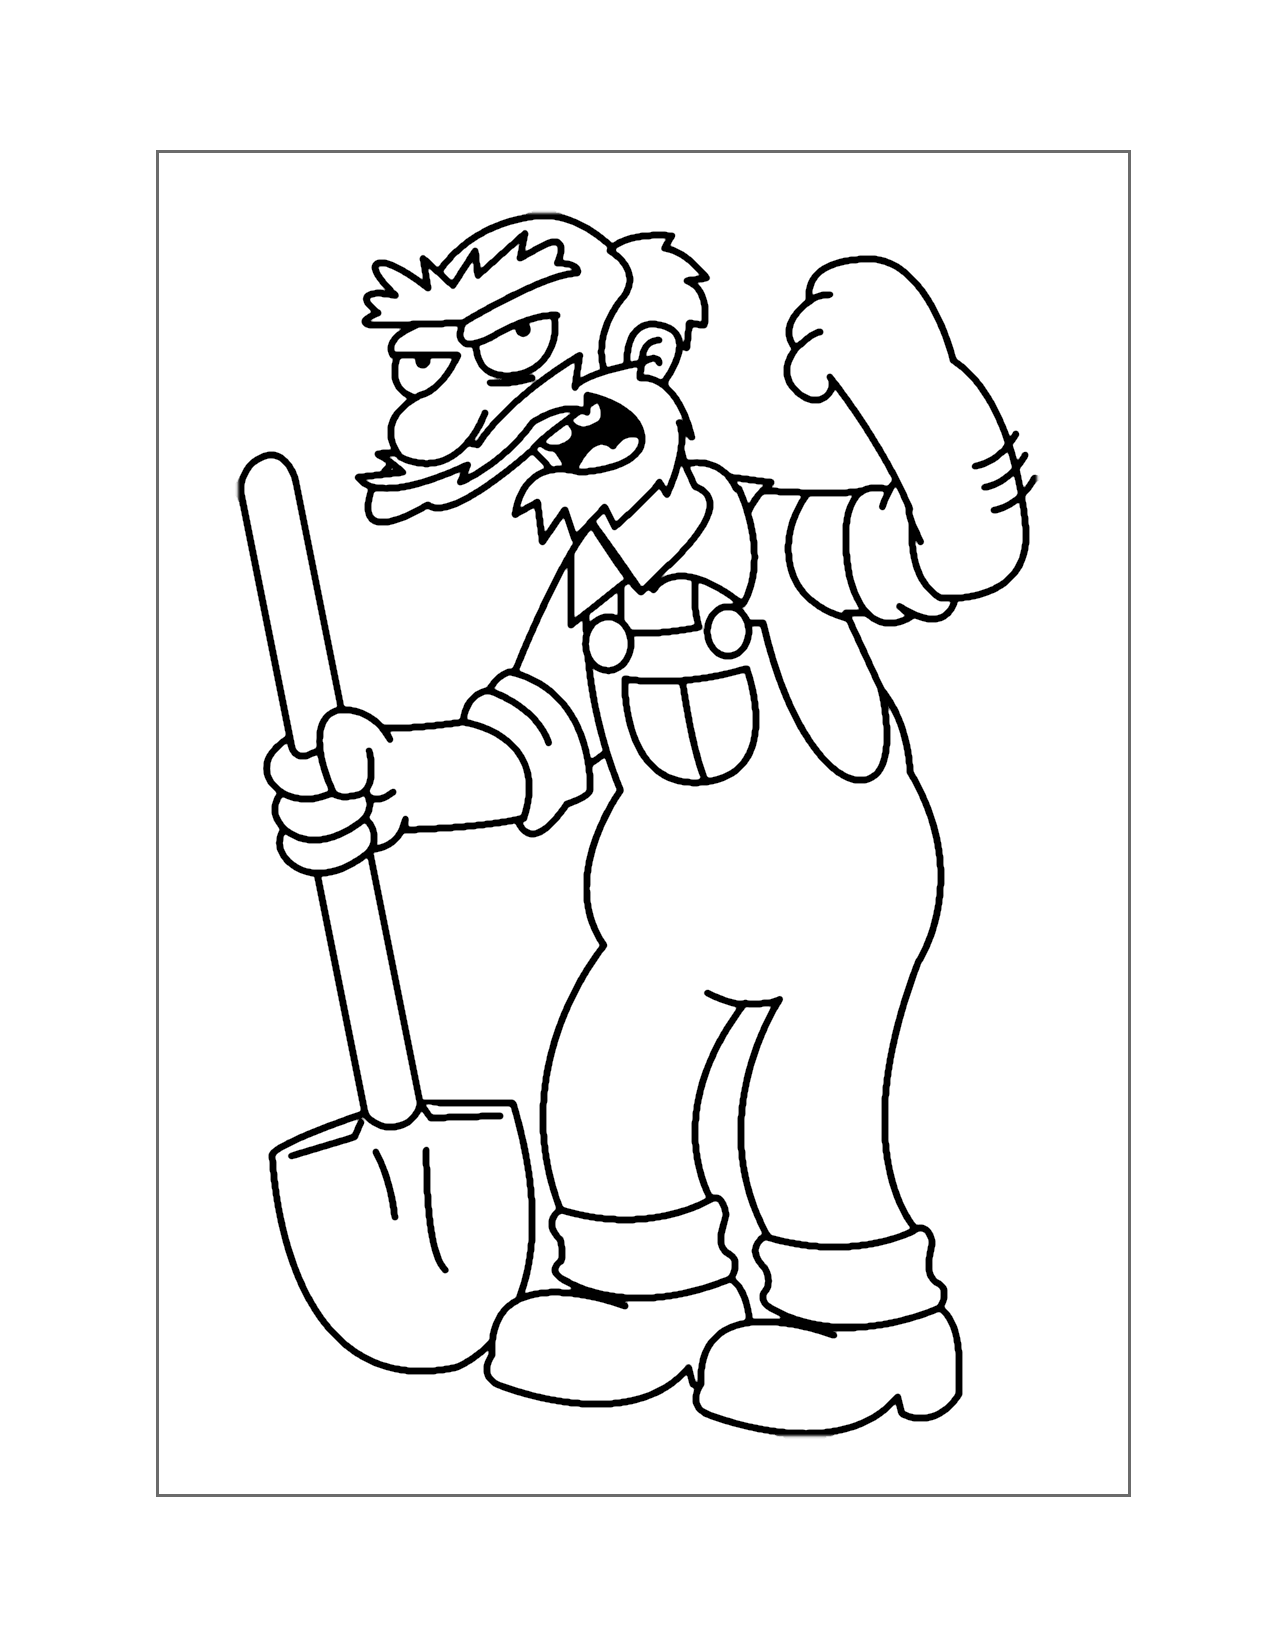 Groundskeeper Willie Simpsons Coloring Page